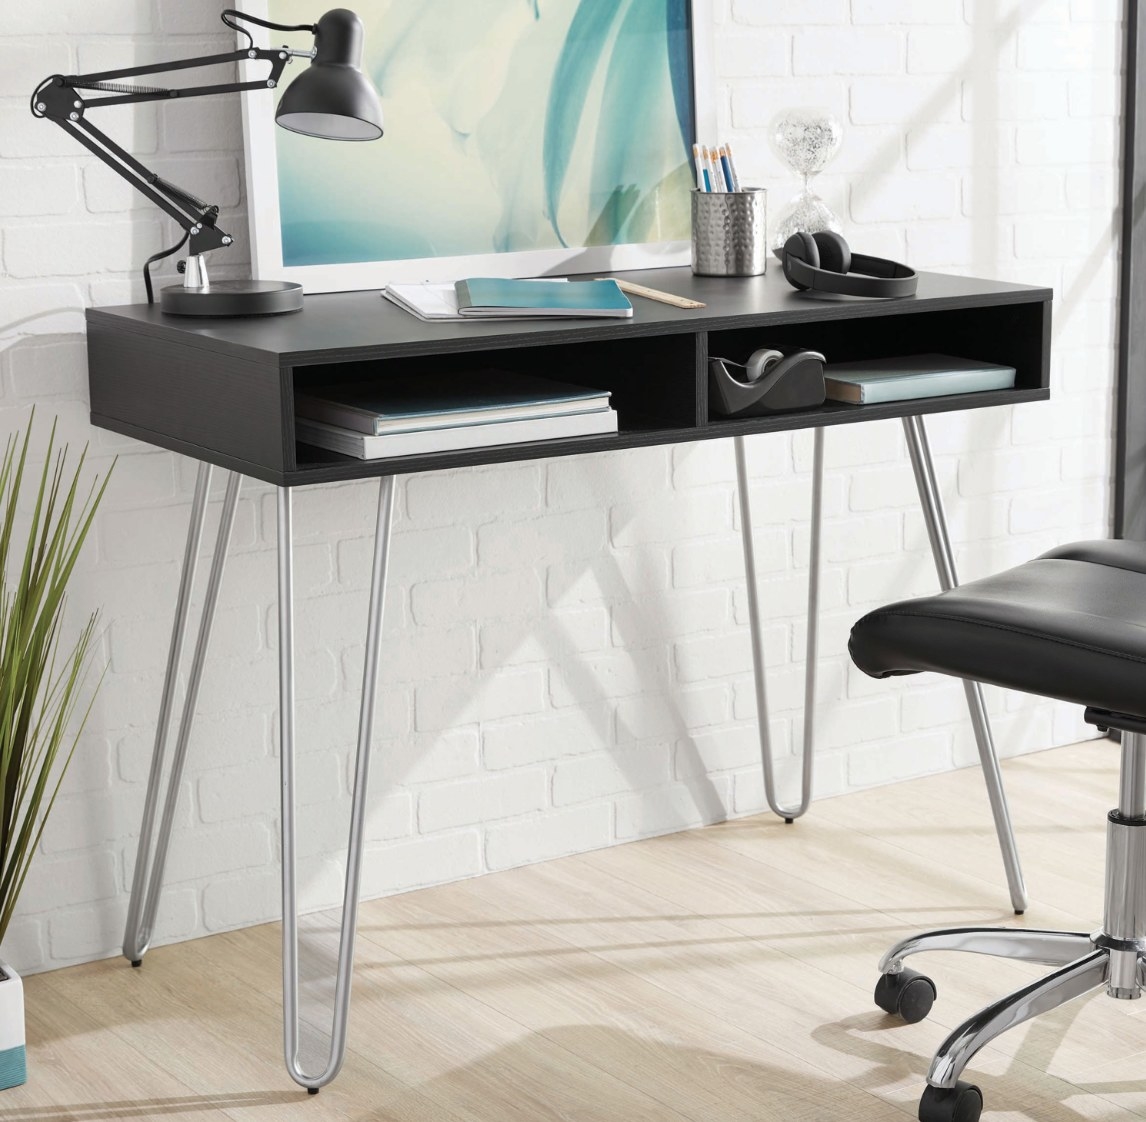 The hairpin writing desk in black with metal legs